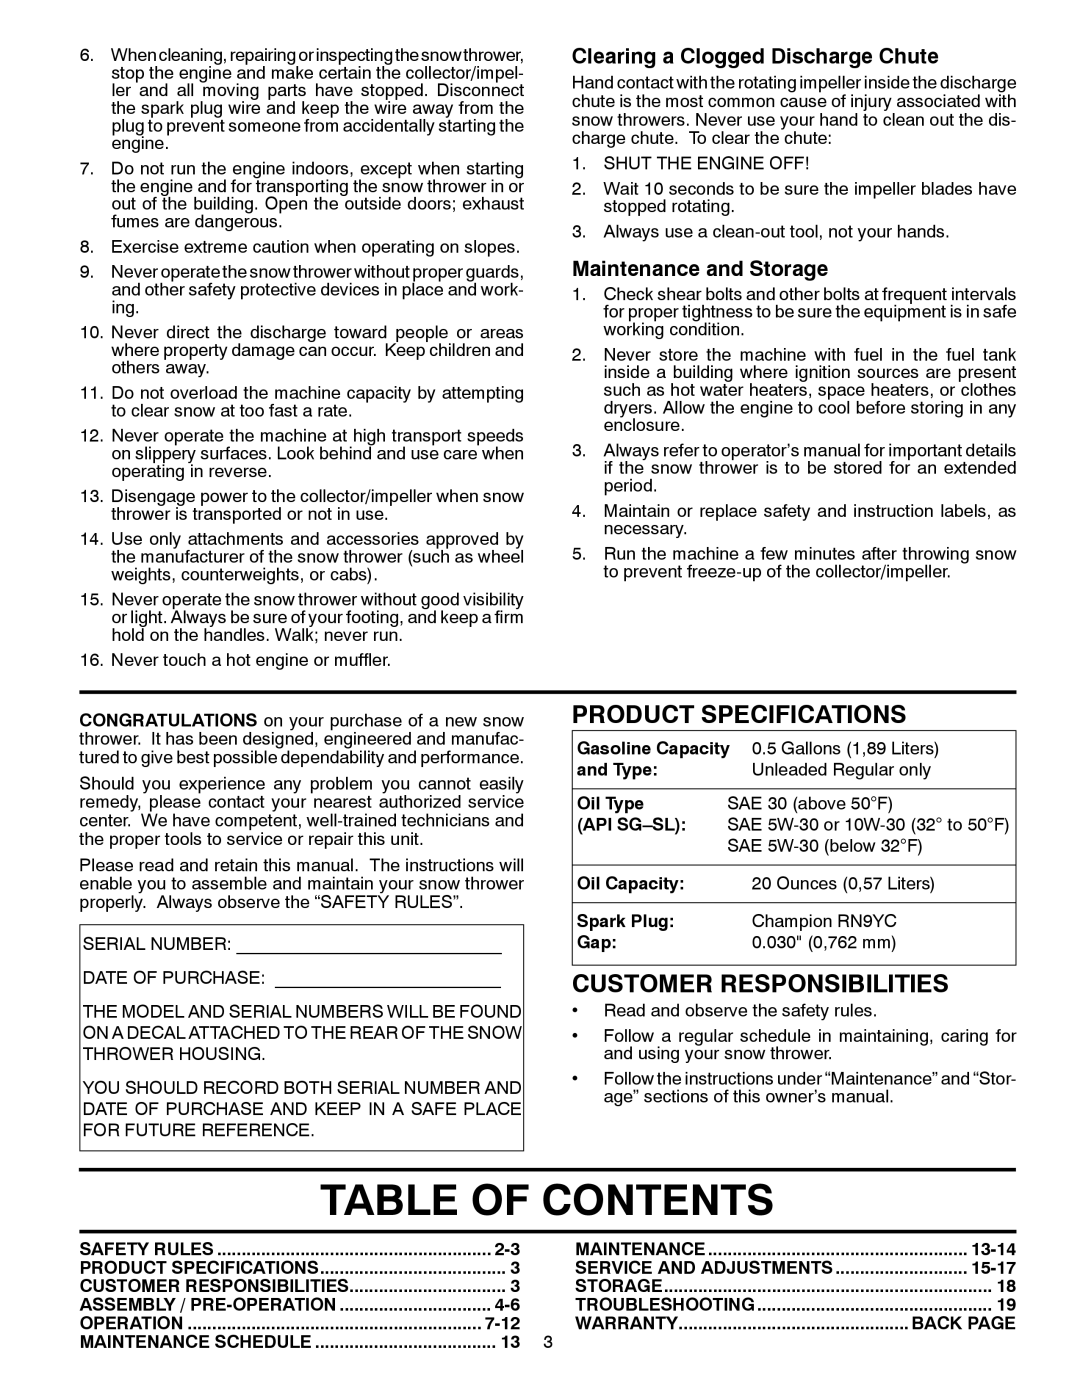 Husqvarna 1827SB Table Of Contents, Clearing a Clogged Discharge Chute, Maintenance and Storage, Product Specifications 